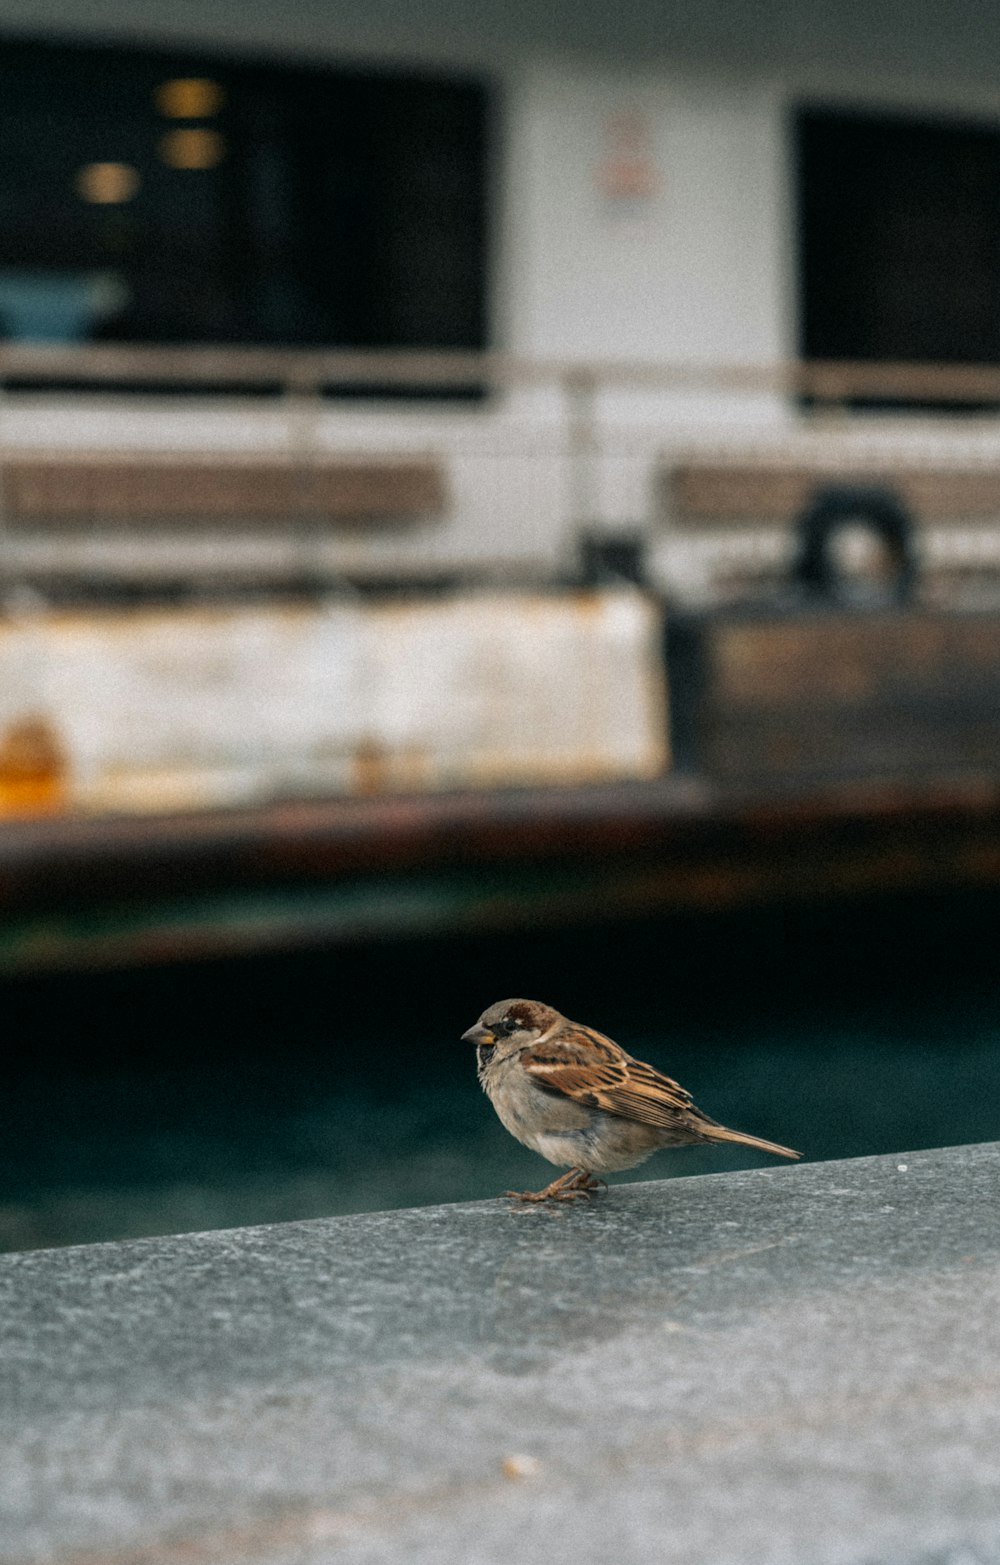 a small bird sitting on the edge of a boat